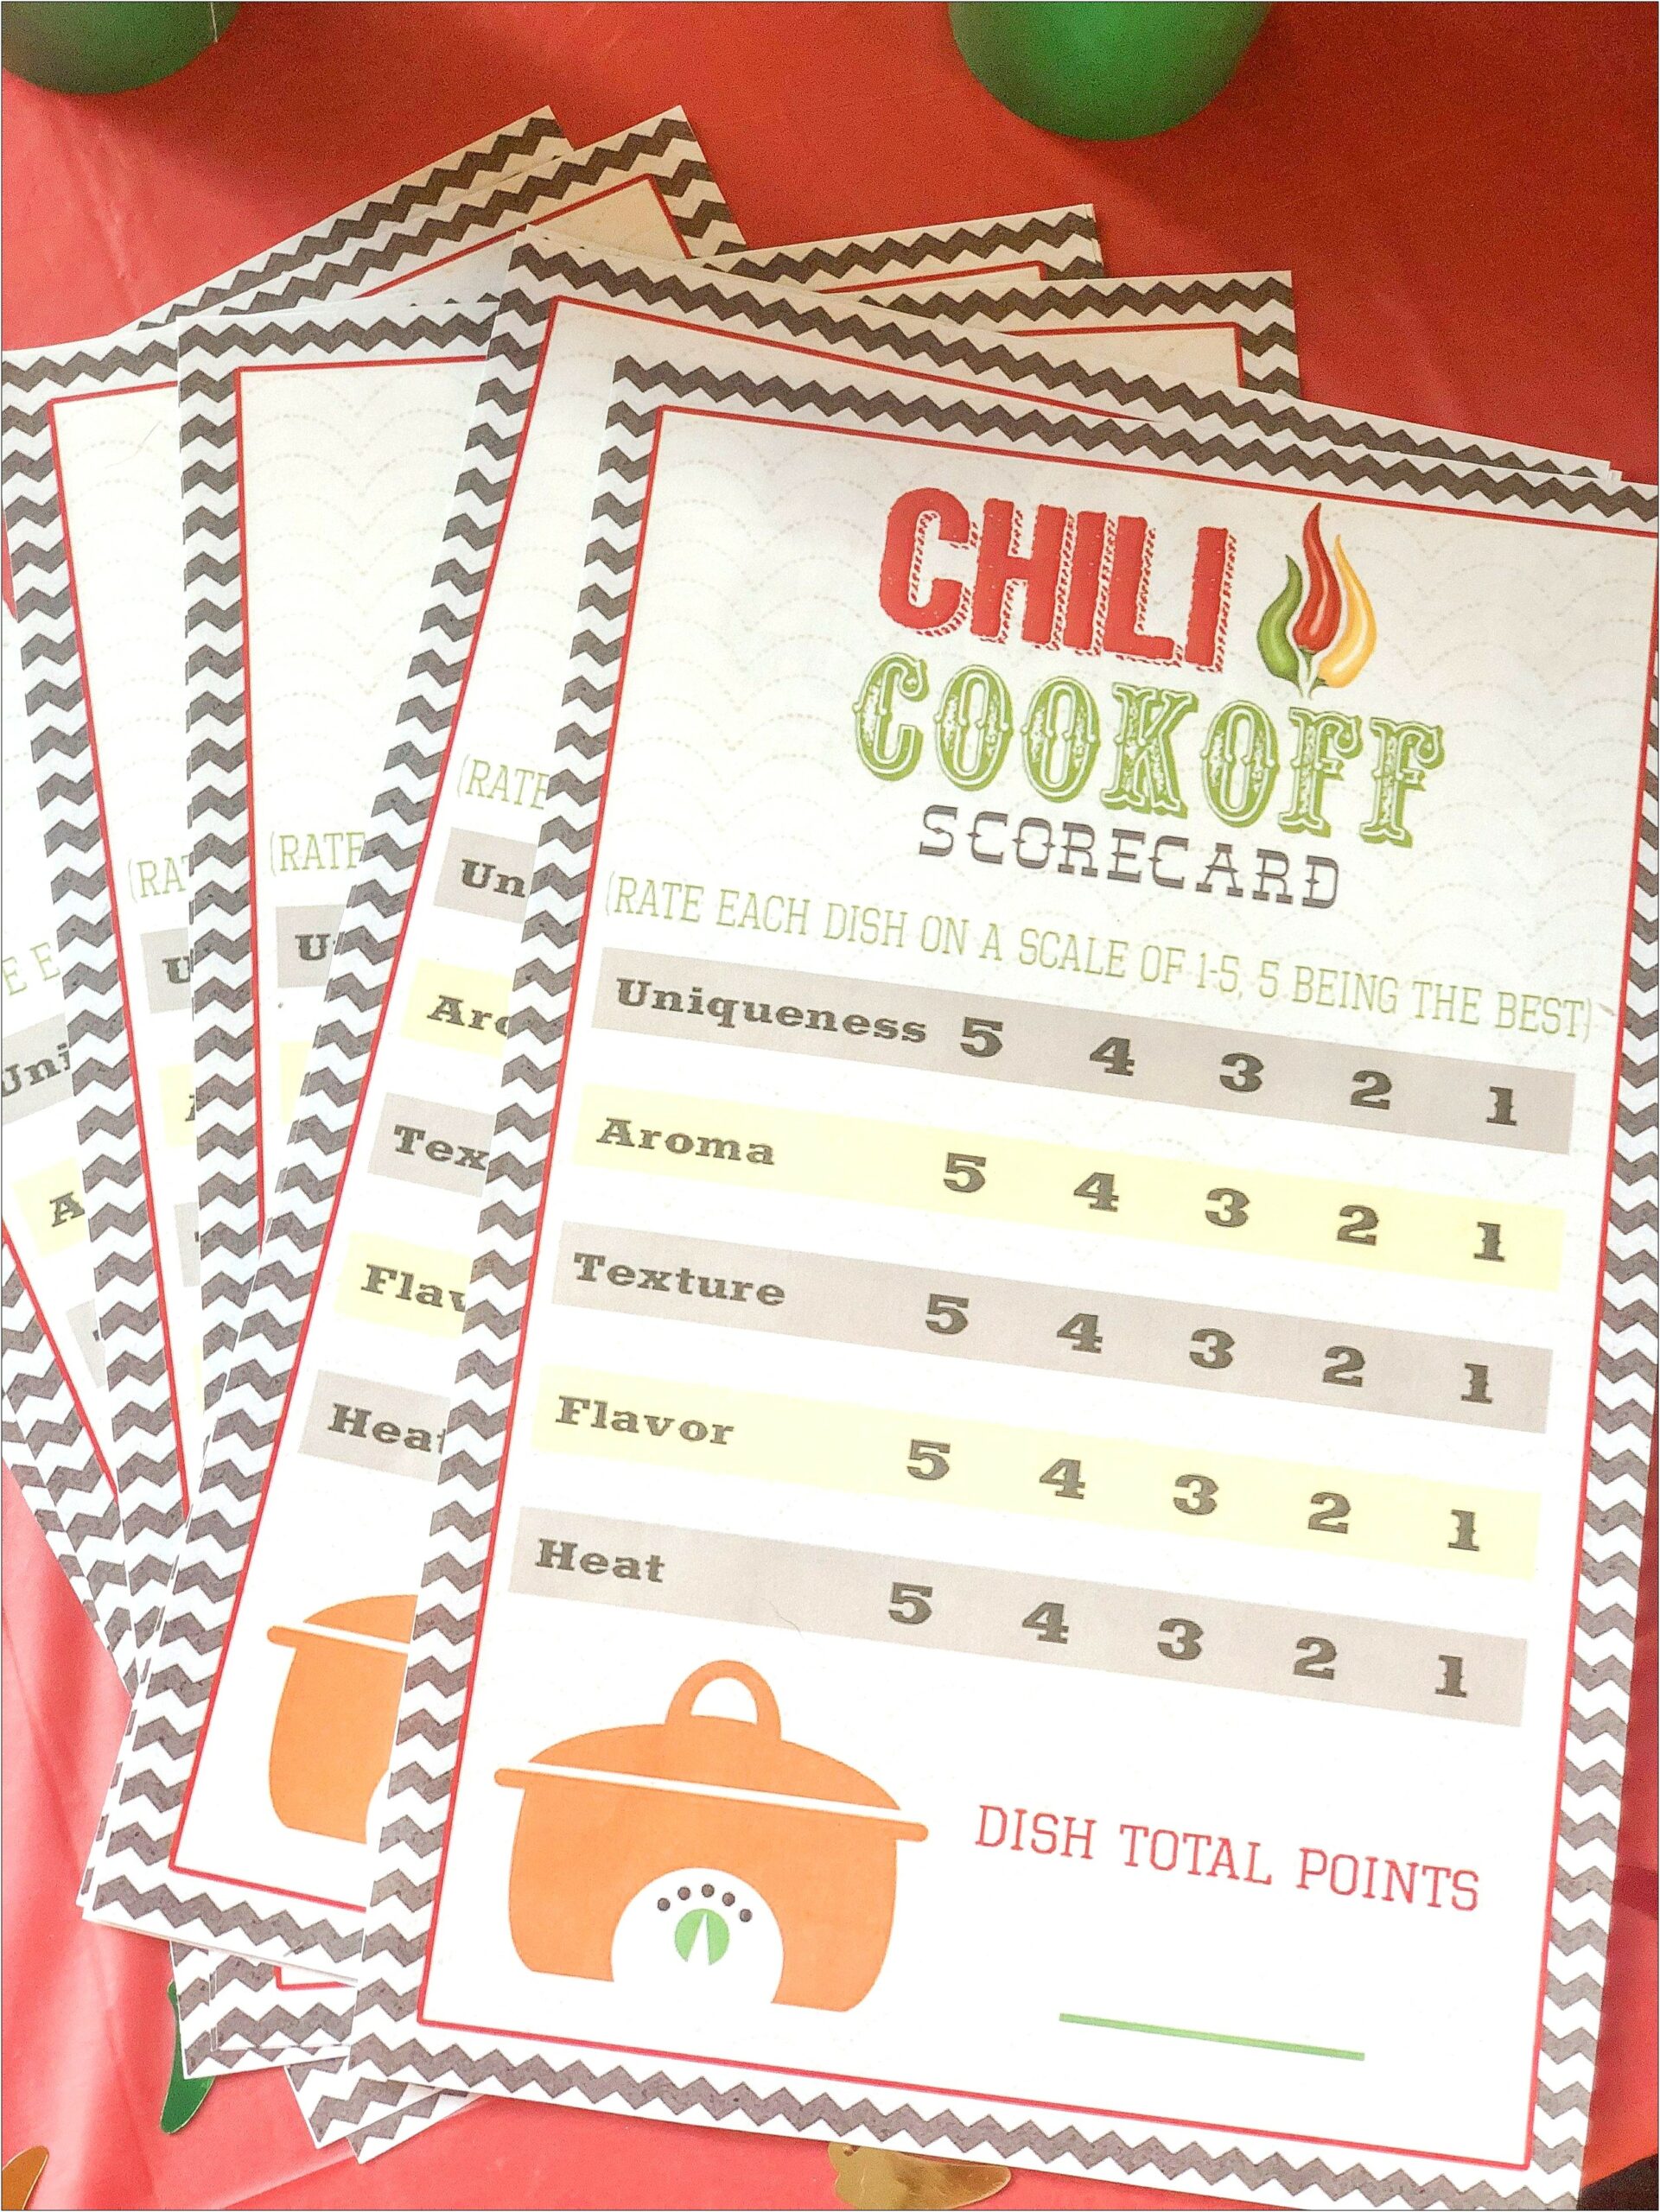 Chili Cook Off Scorecard Template Ms Word